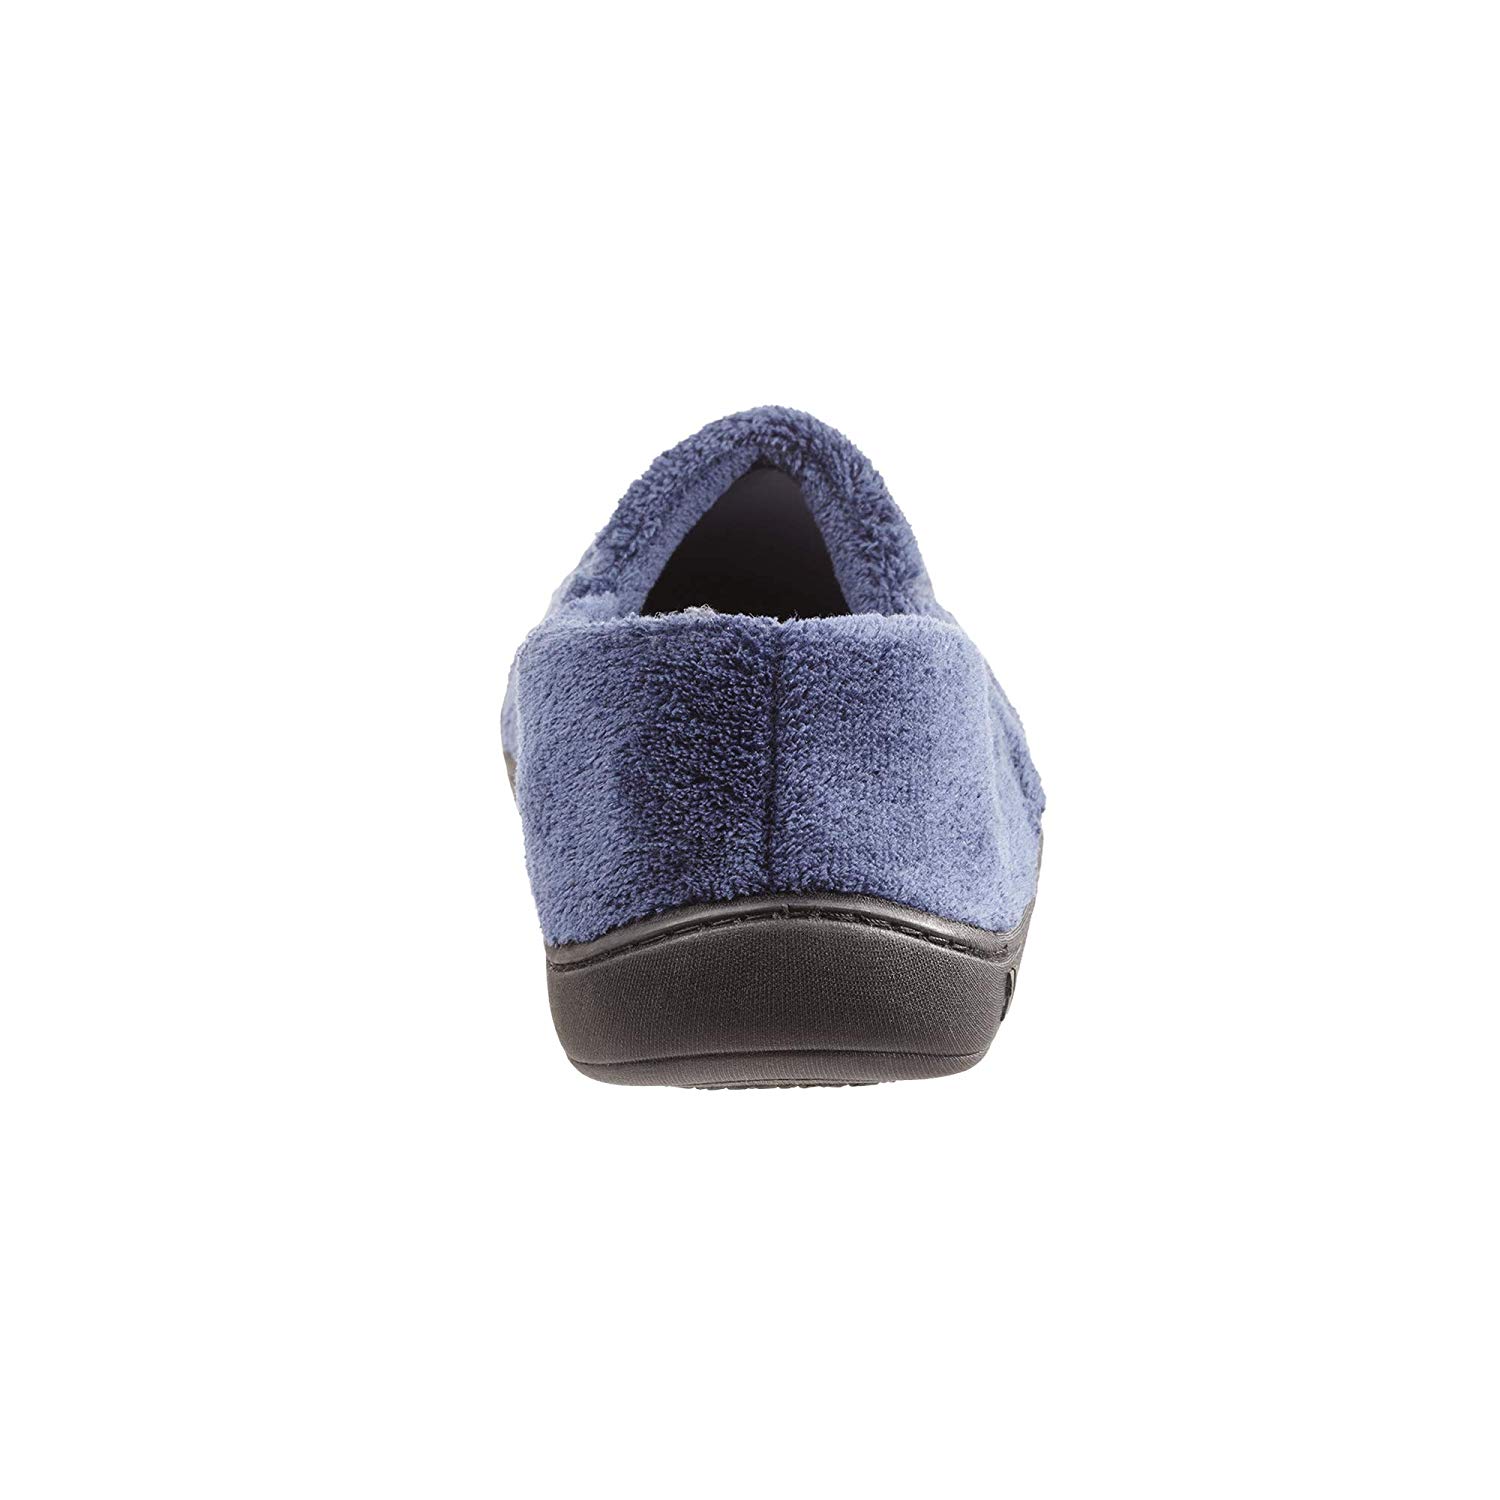 ISOTONER Men's Terry Moccasin Slipper with Memory Foam for, Navy, Size ...